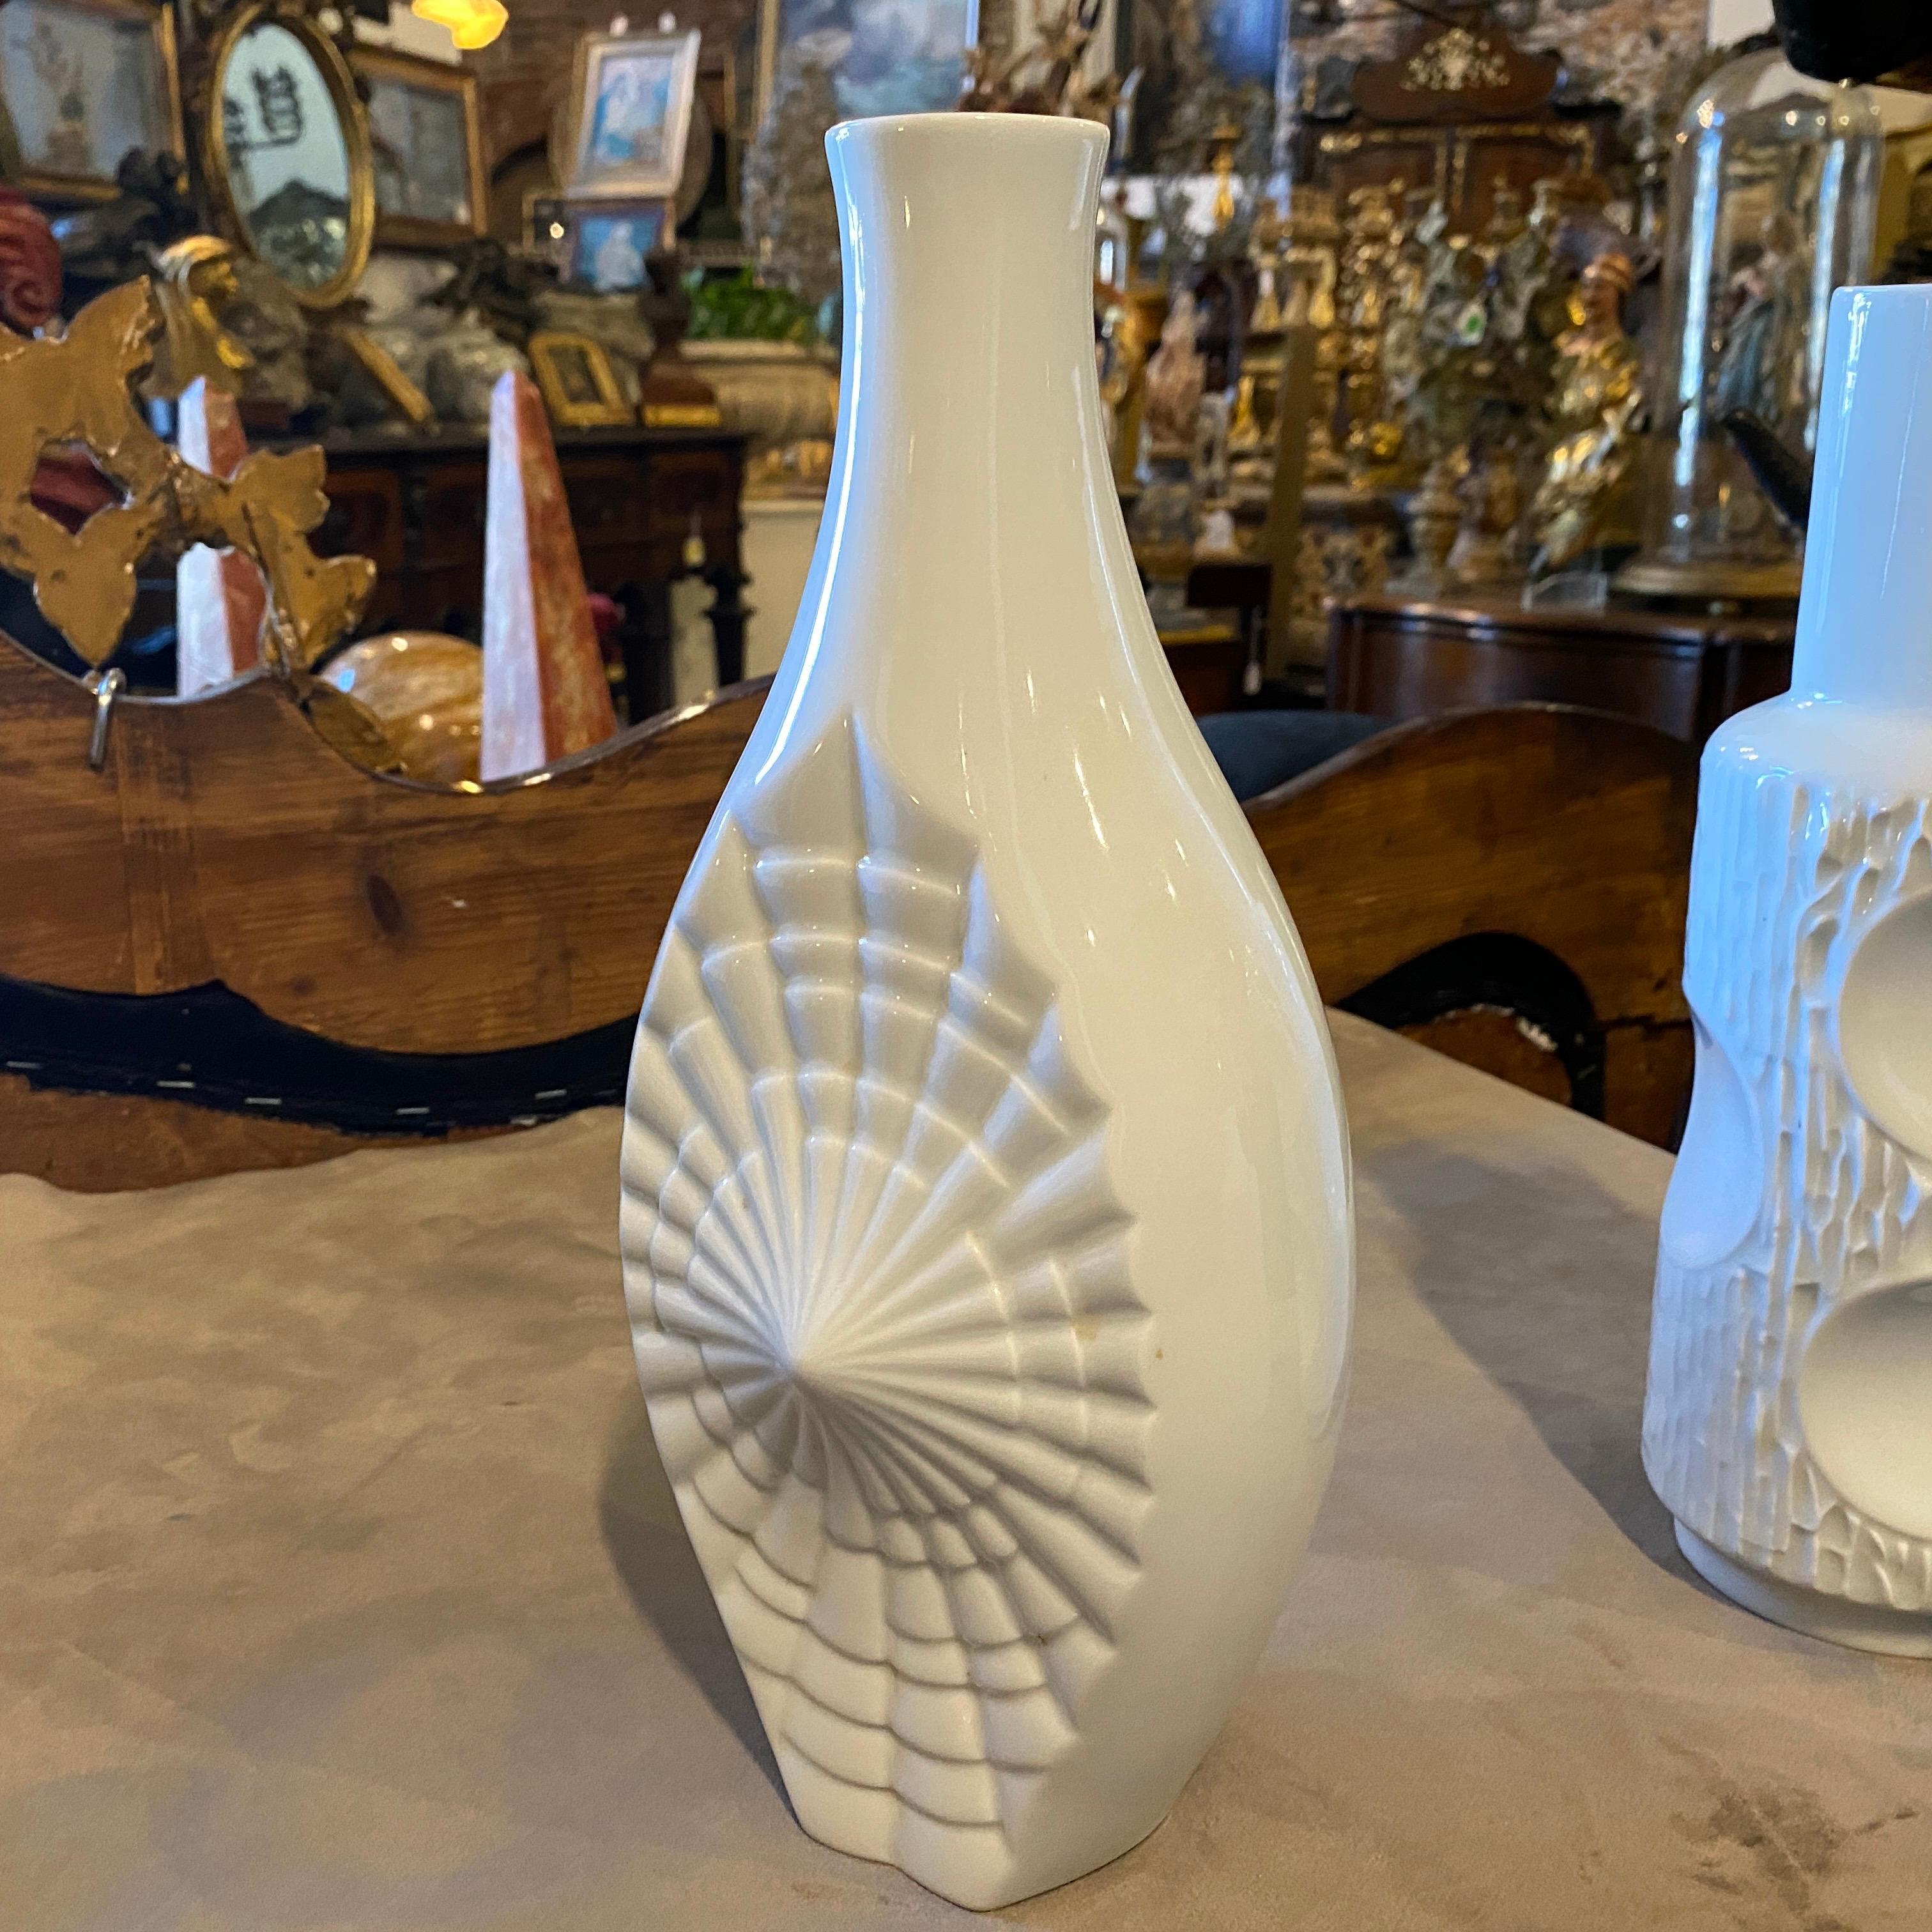 Three white ceramic vases made in Germany, all of them are in perfect conditions and from different manufacturers, height of medium vase is 29 cm, the small vase height is 17 cm